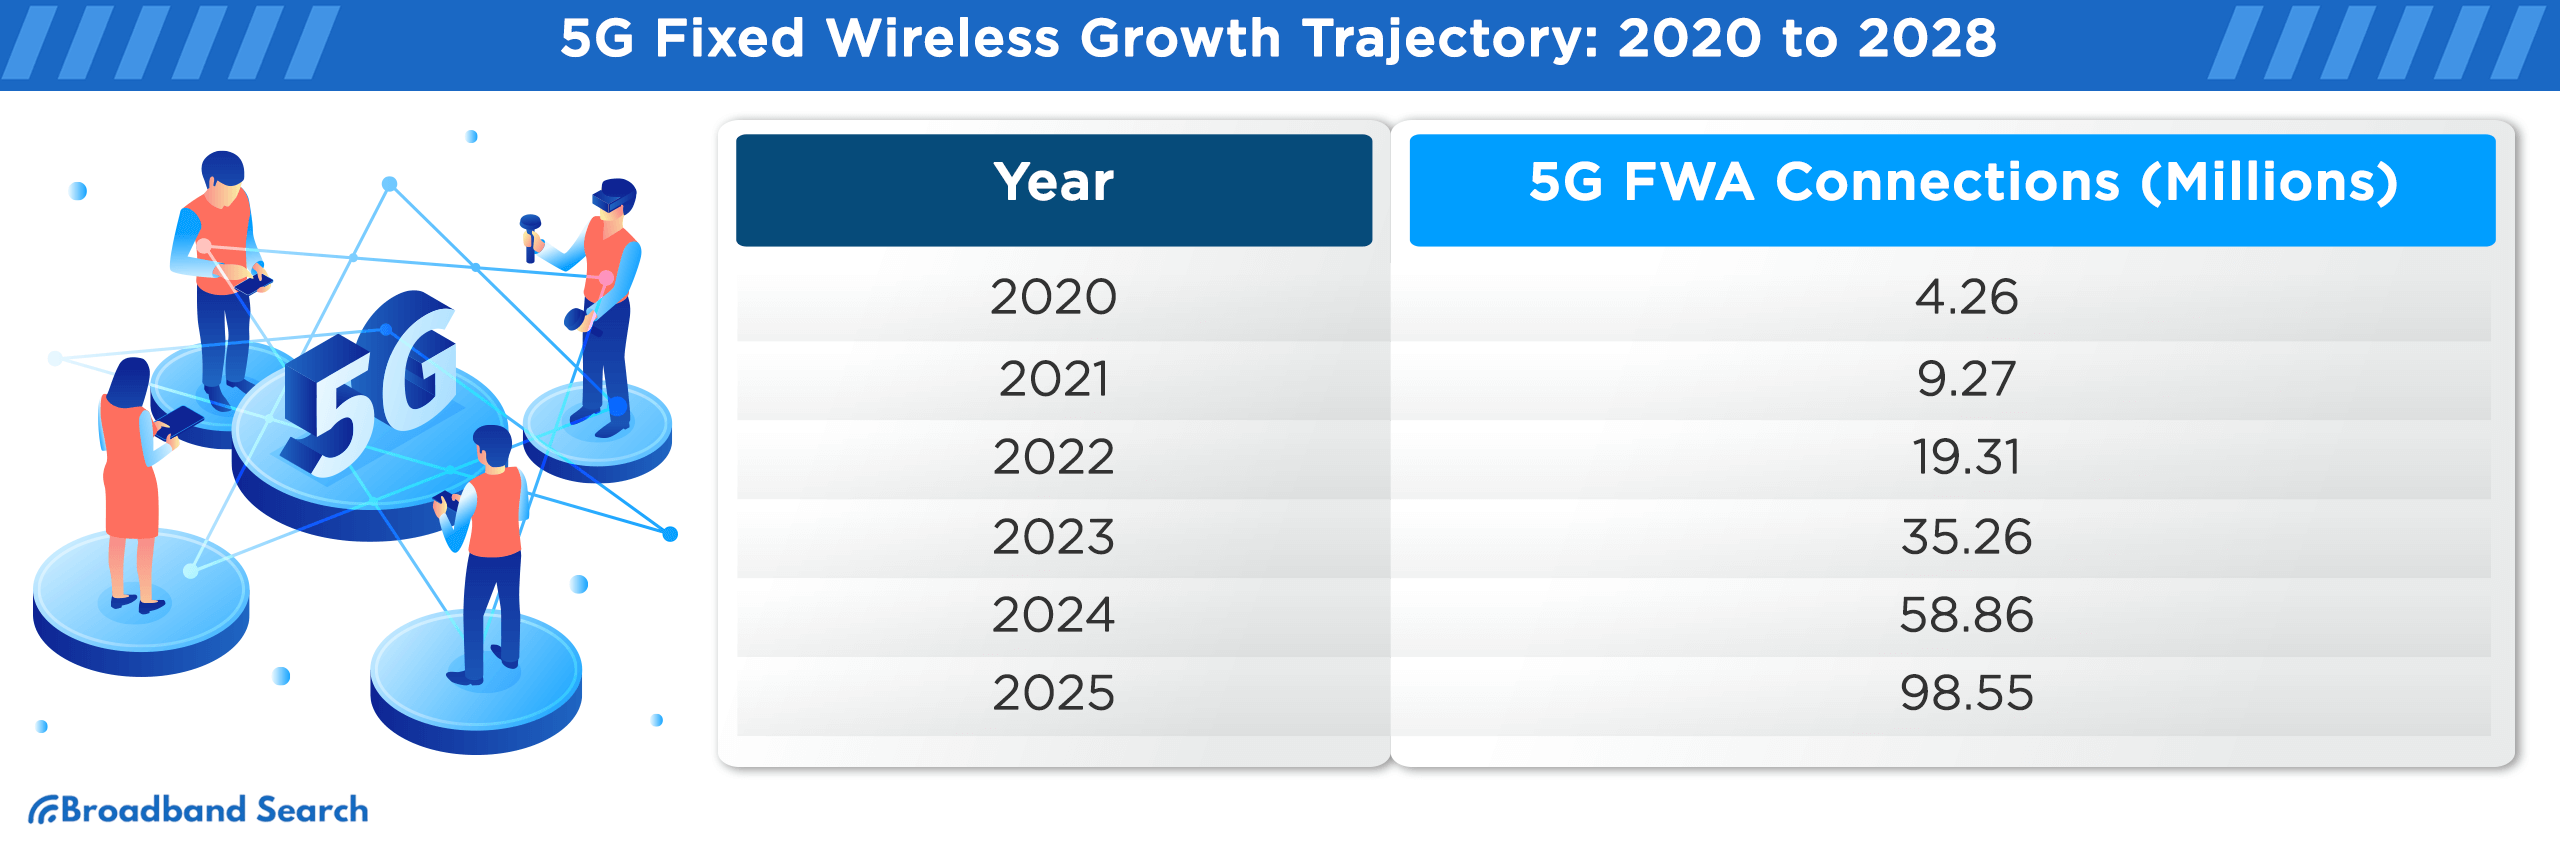 5G Fixed Wireless growth trajectory from 2020 to 2028